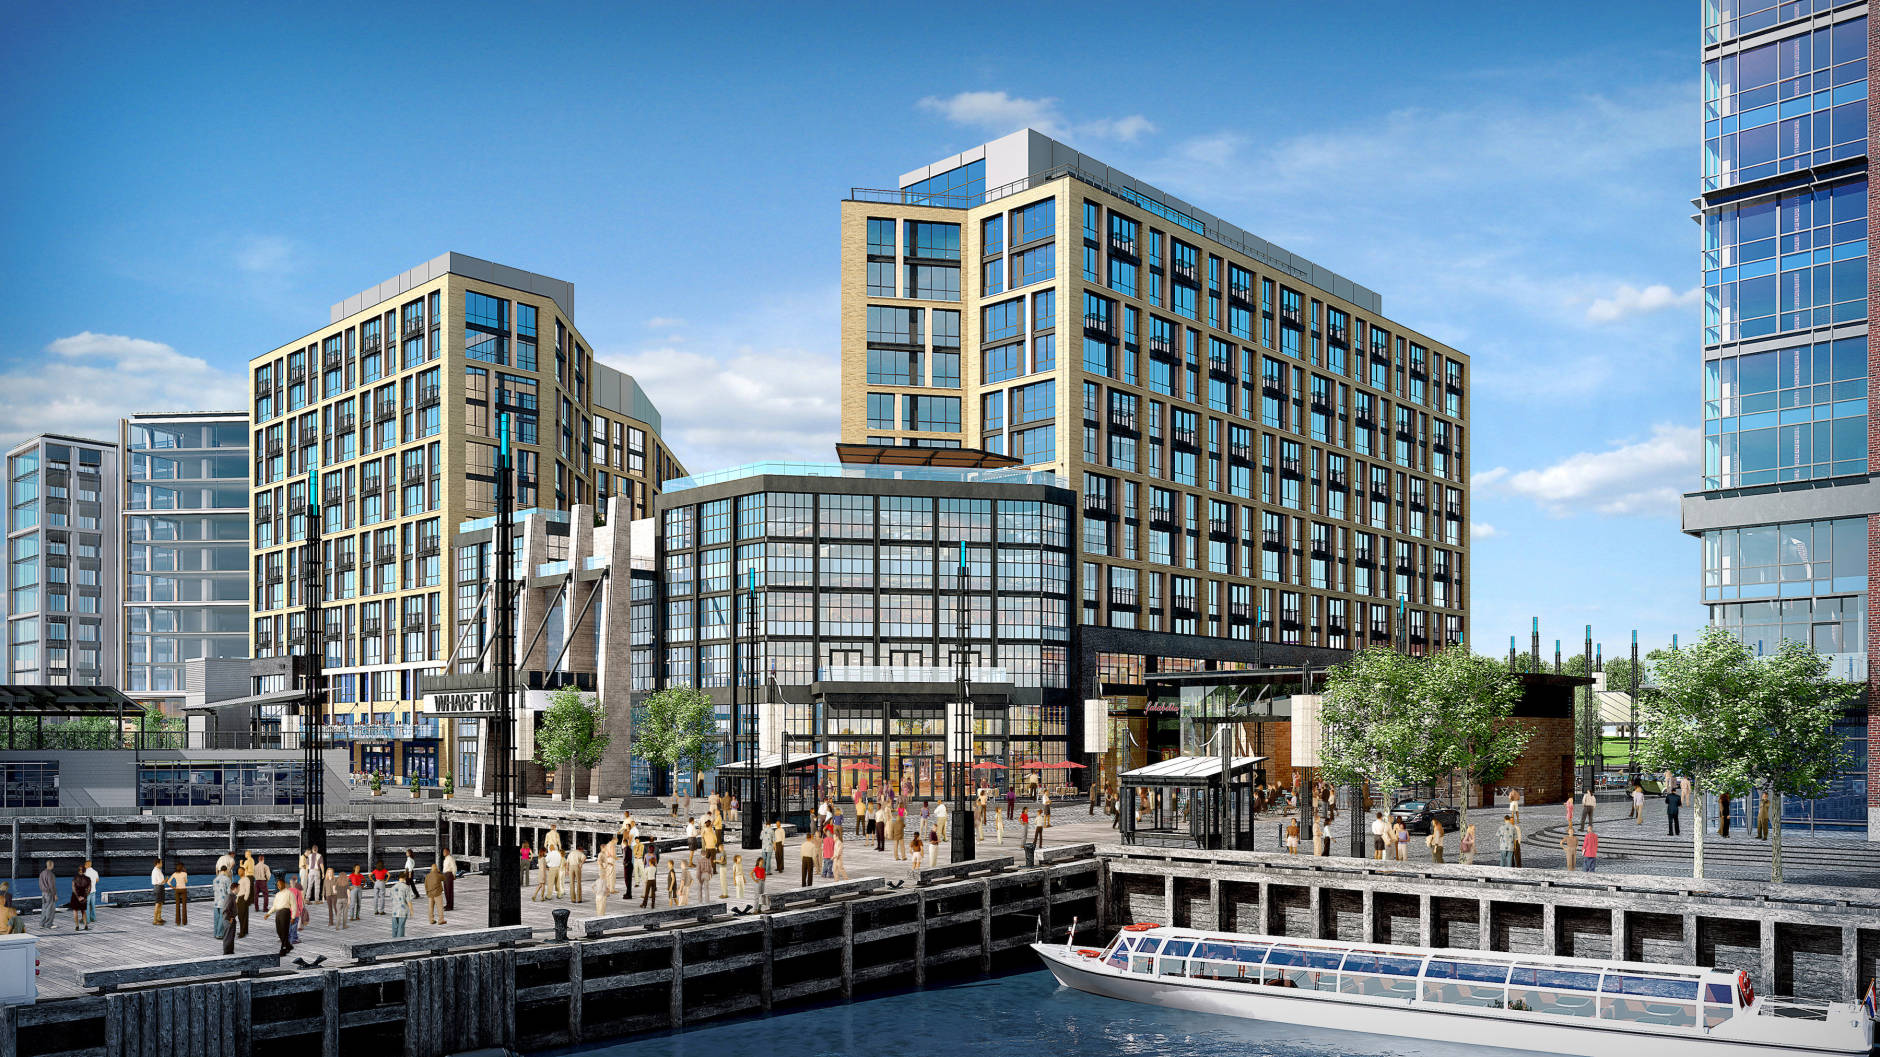 This artists rendering shows The Channel apartment structure, which will open in 2017 as part of The Wharf development in the Southwest Waterfront. The building will have 500 units making it among the largest apartment buildings in the District. (Courtesy  Hoffman-Madison Waterfront)